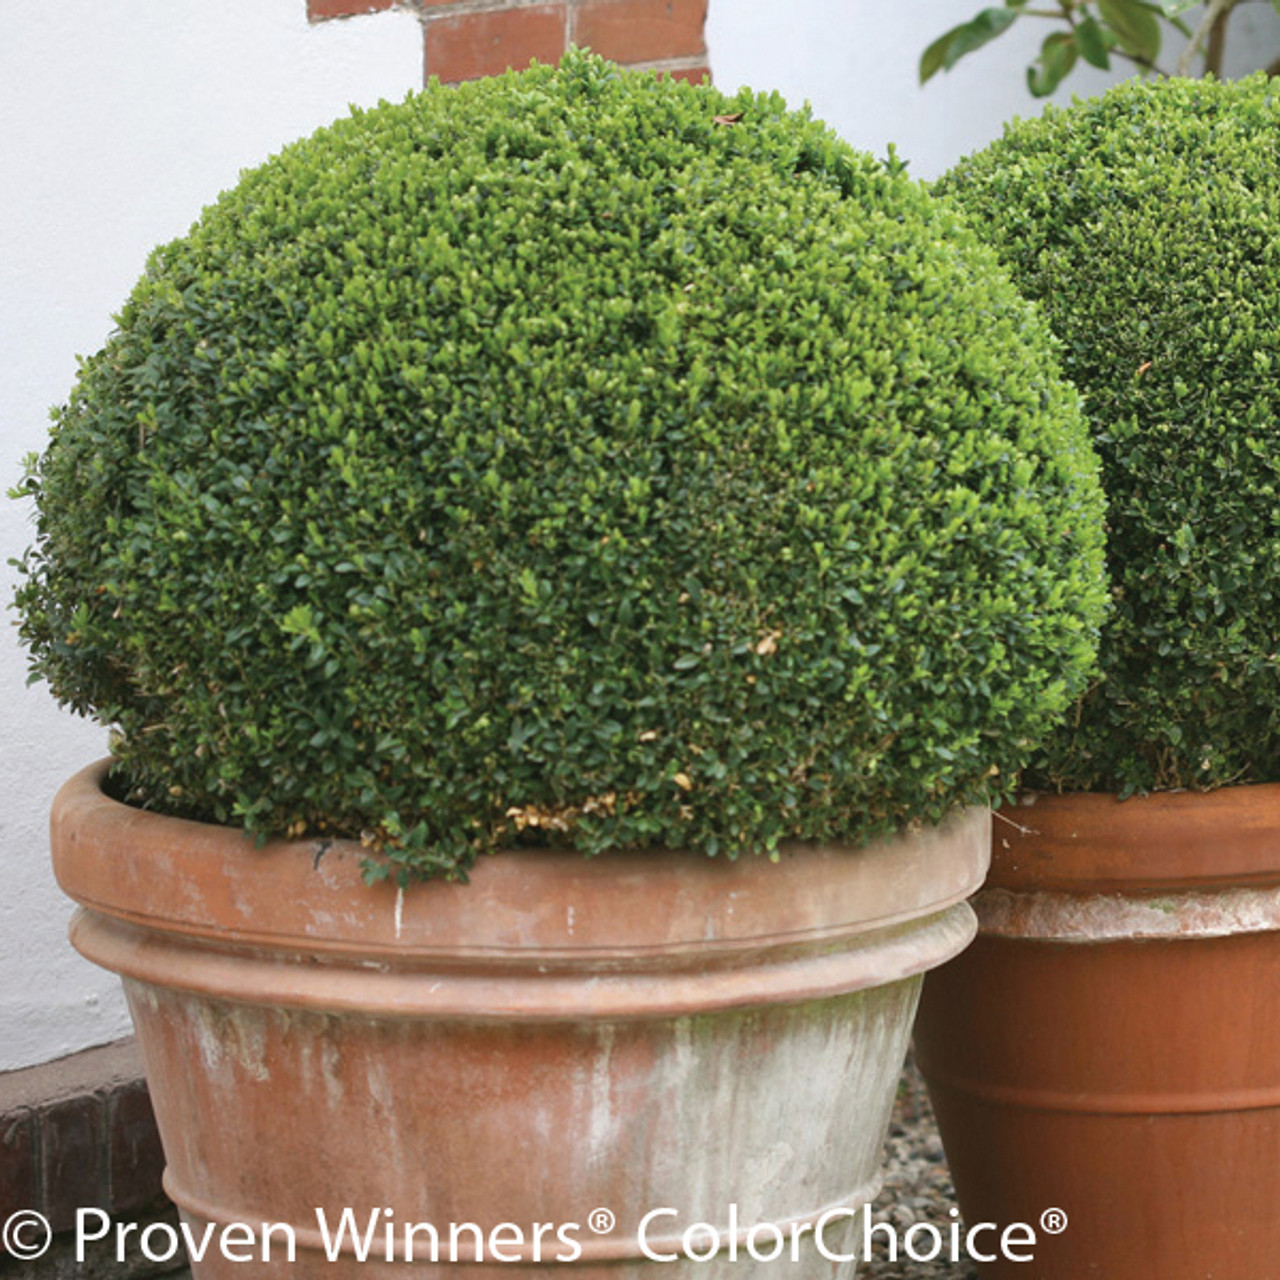 Image of Upright boxwood in a pot